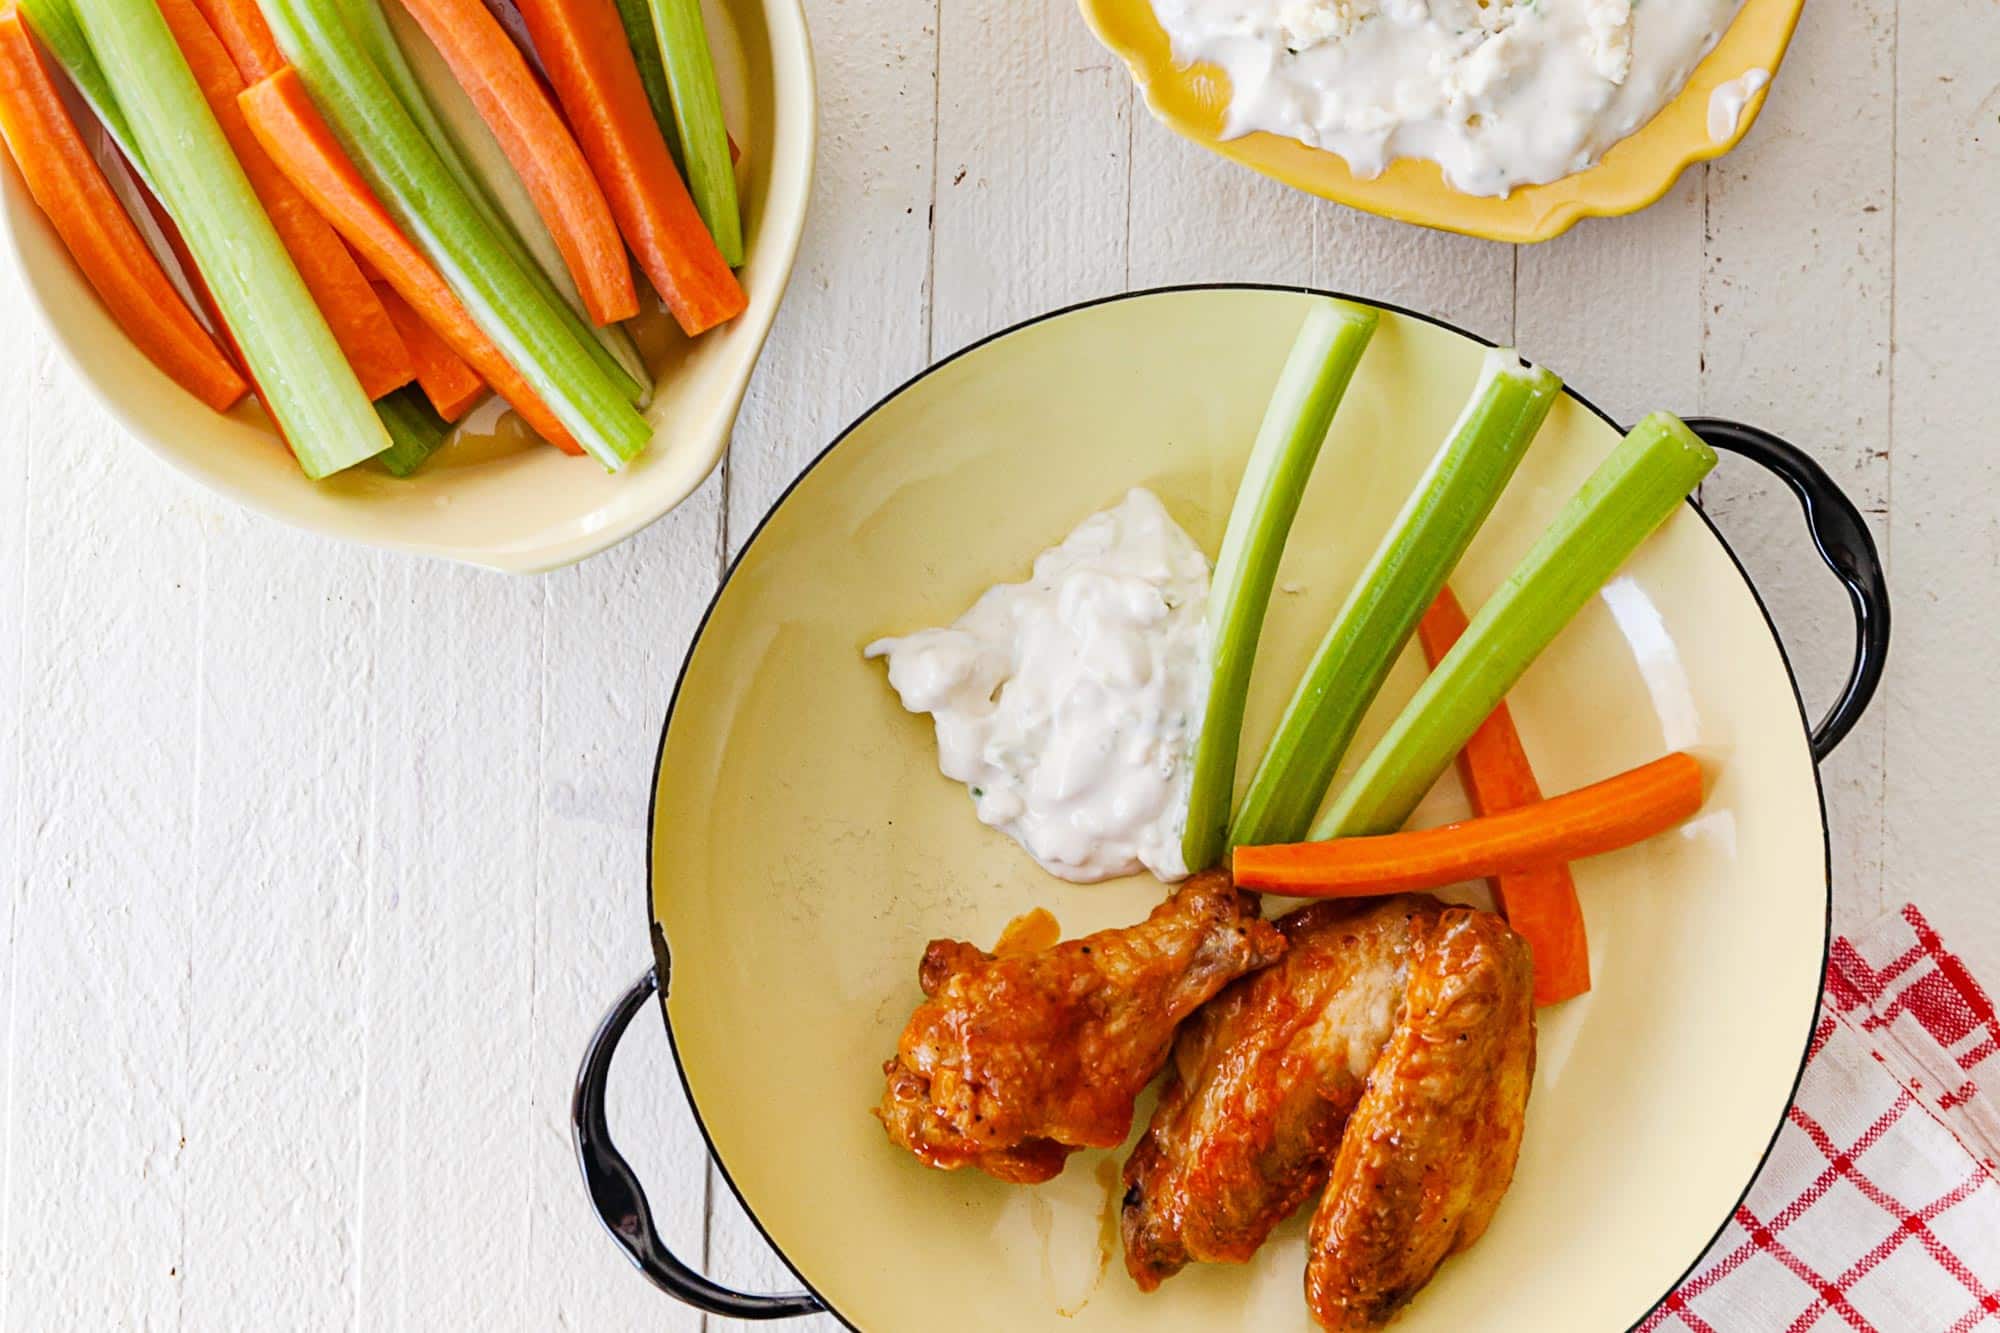 Air Fryer Buffalo Chicken Wings on a yellow plate with celery, carrots, and some blue cheese dip.